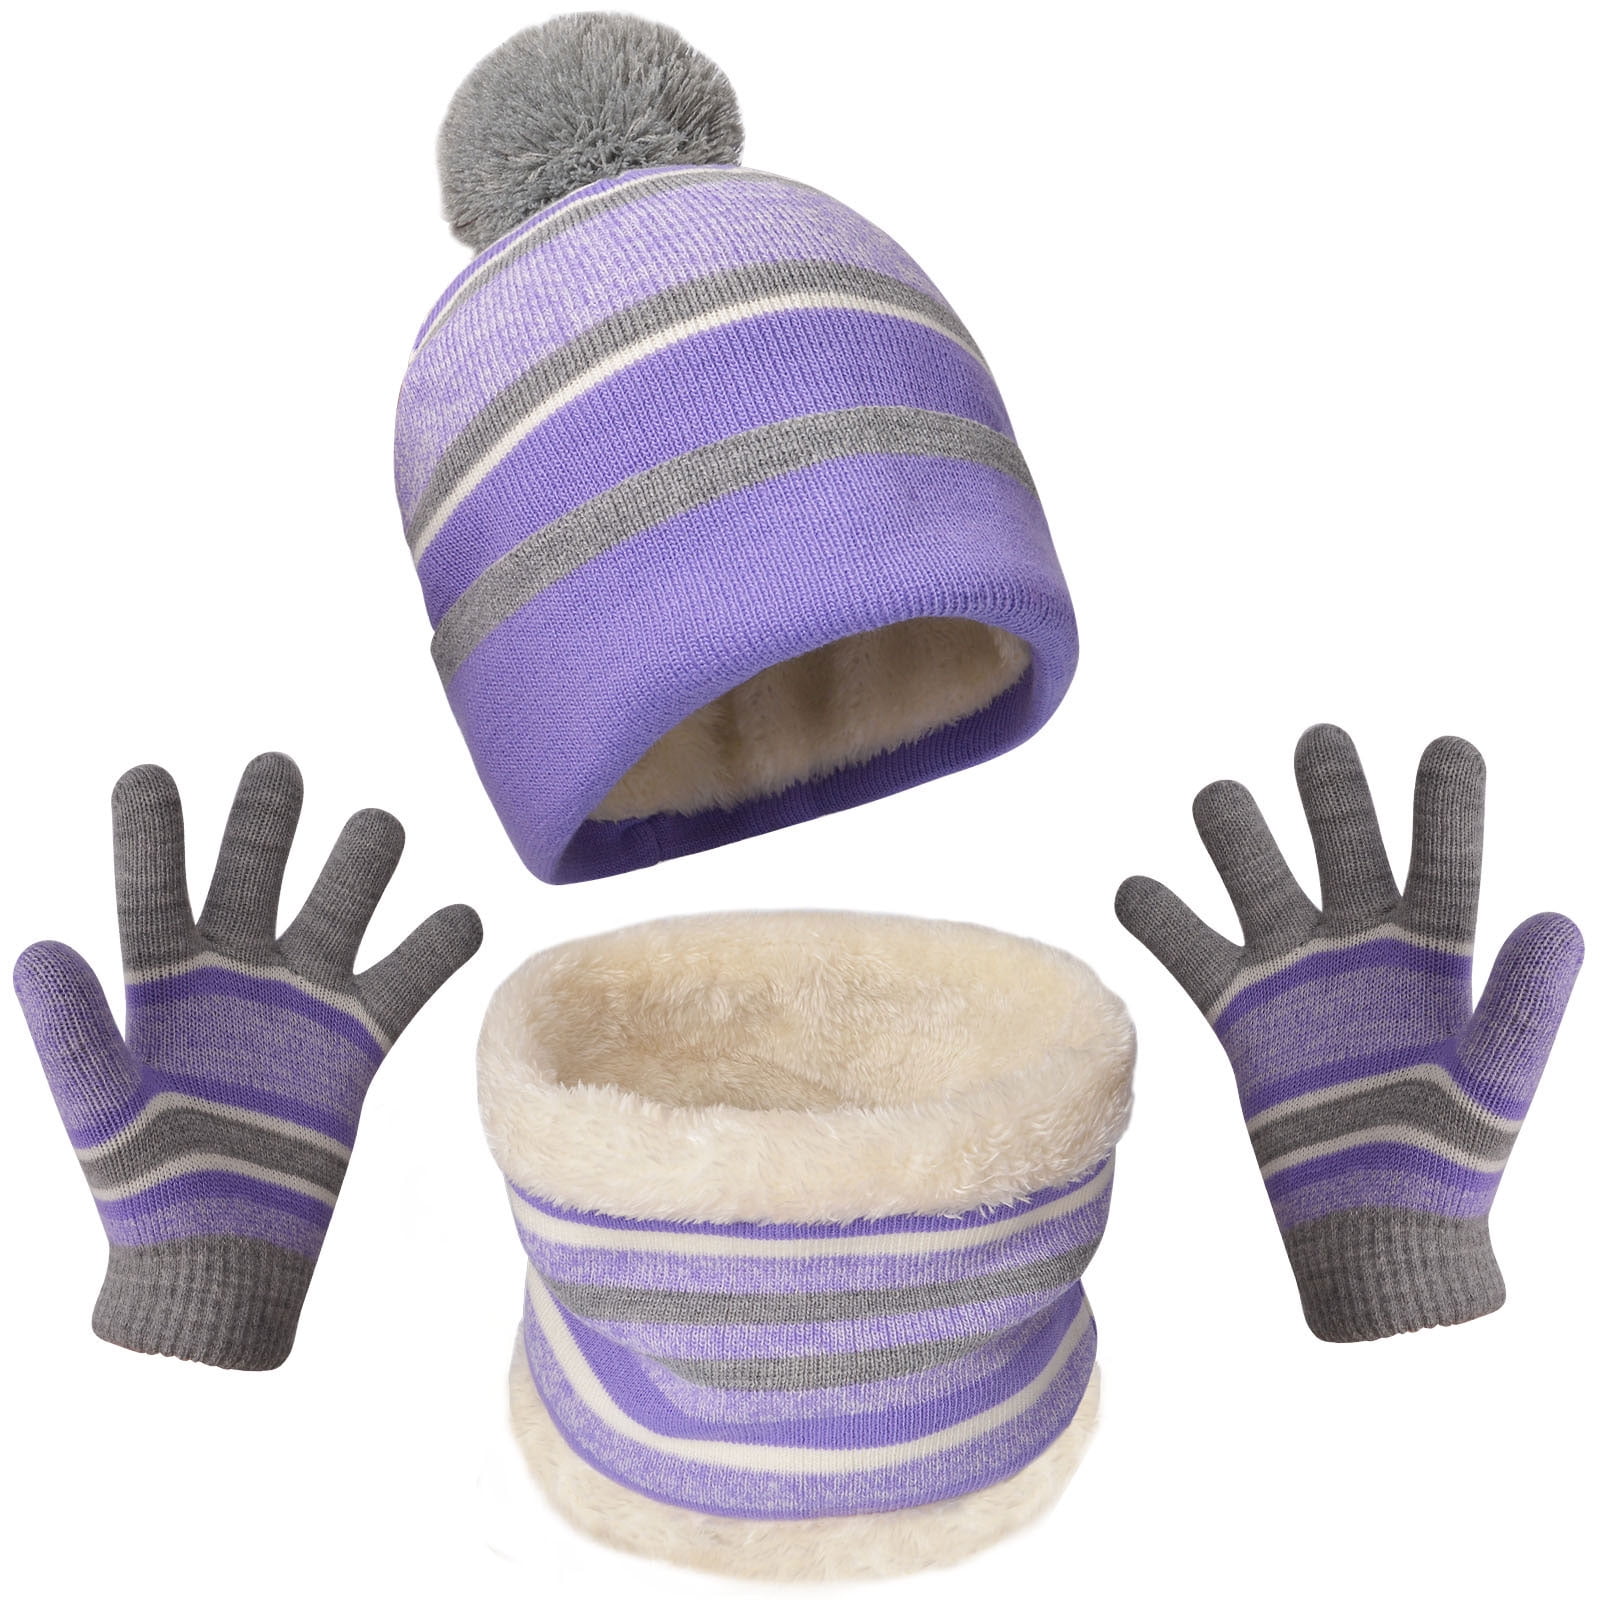 5 GIRLS TEEN HAT GLOVES COLD WEATHER ACCESSORIES THINSULATE KNIT PURPLE PINK 